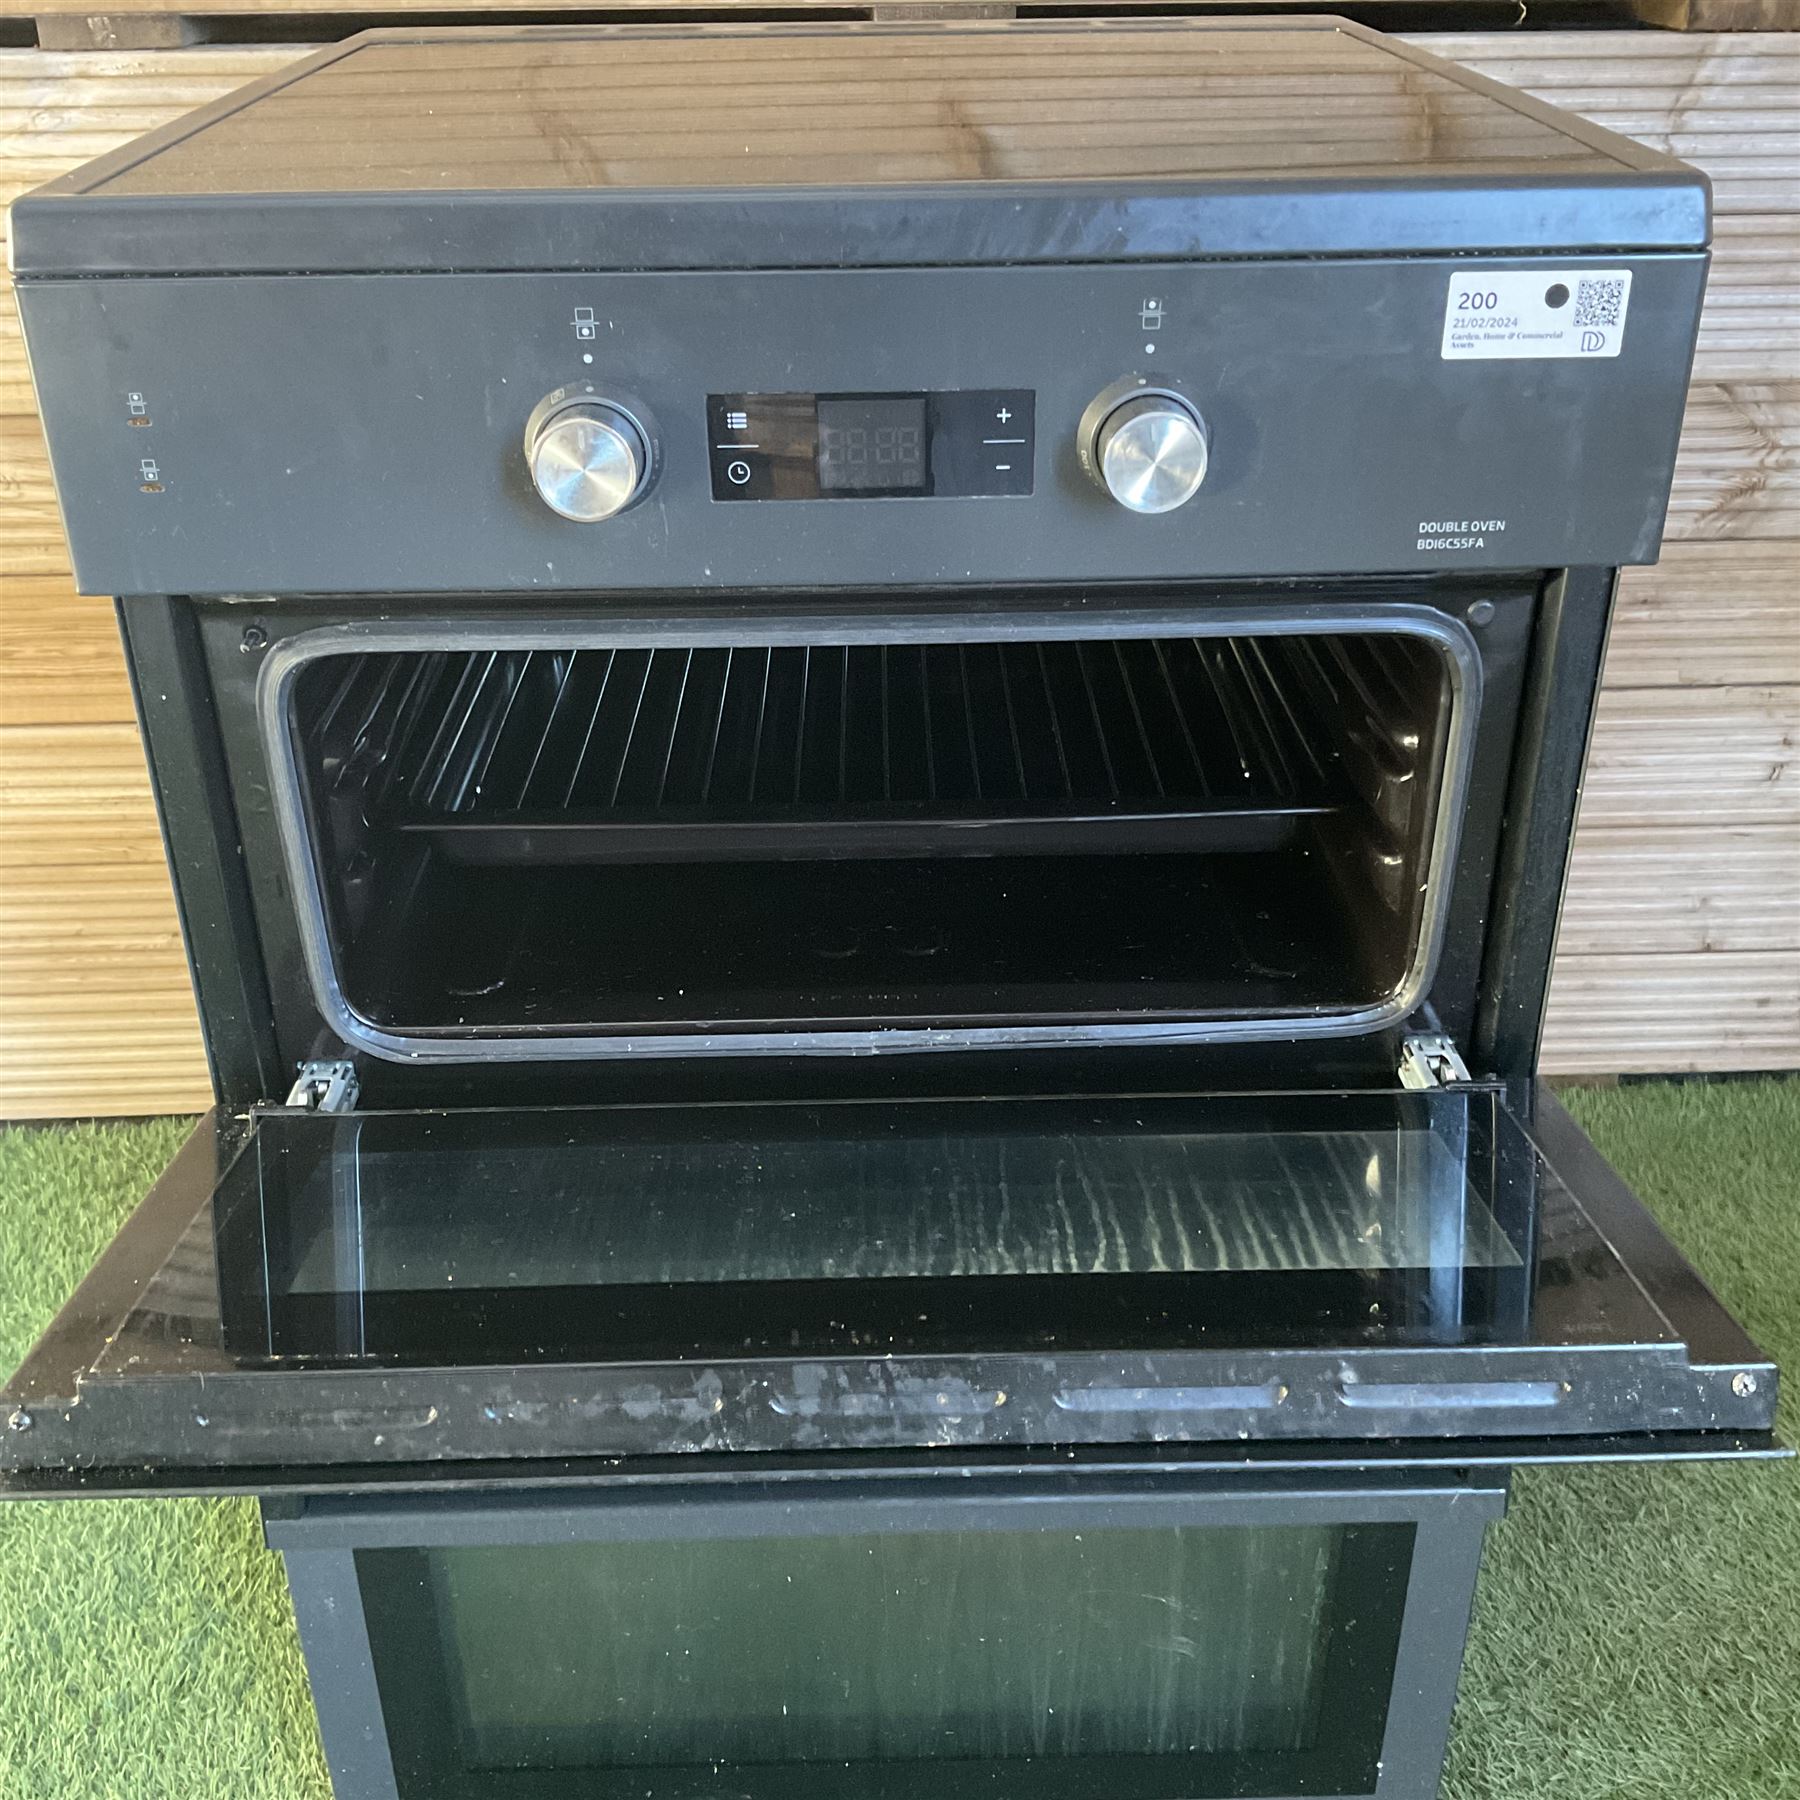 Beko BD16C55FA Double oven black finish domestic cooker - THIS LOT IS TO BE COLLECTED BY APPOINTMEN - Image 3 of 4